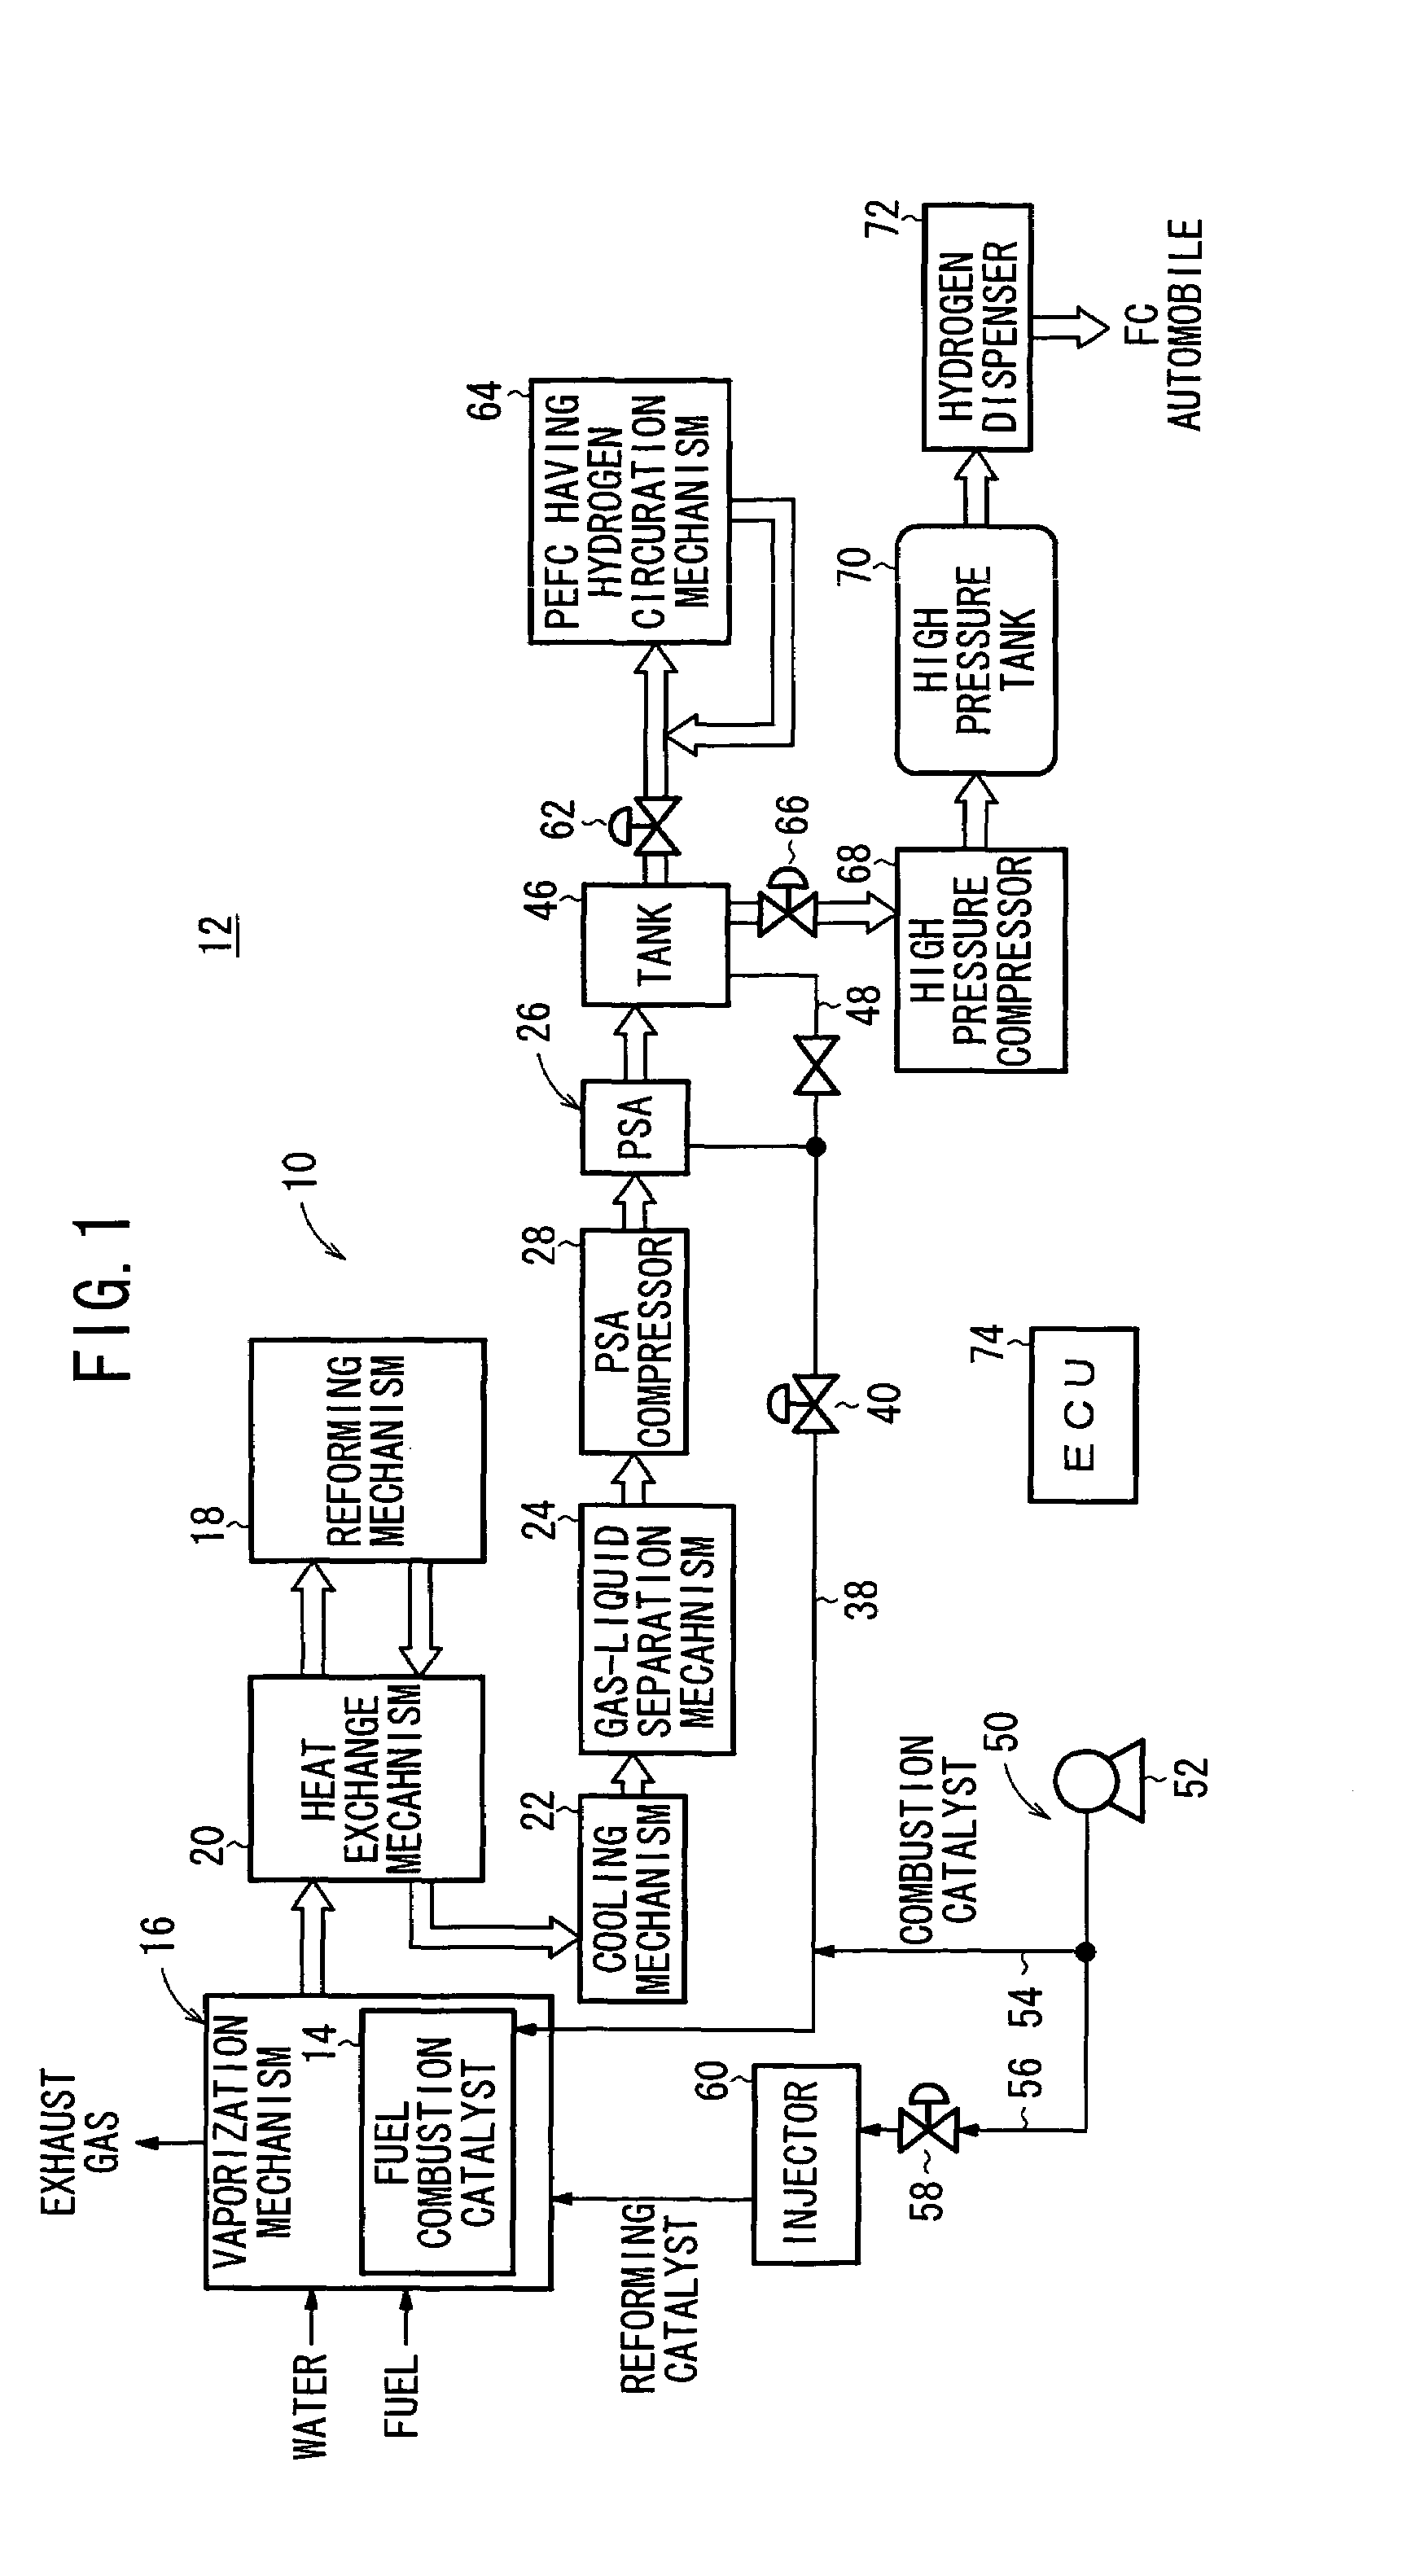 Fuel gas production method and apparatus